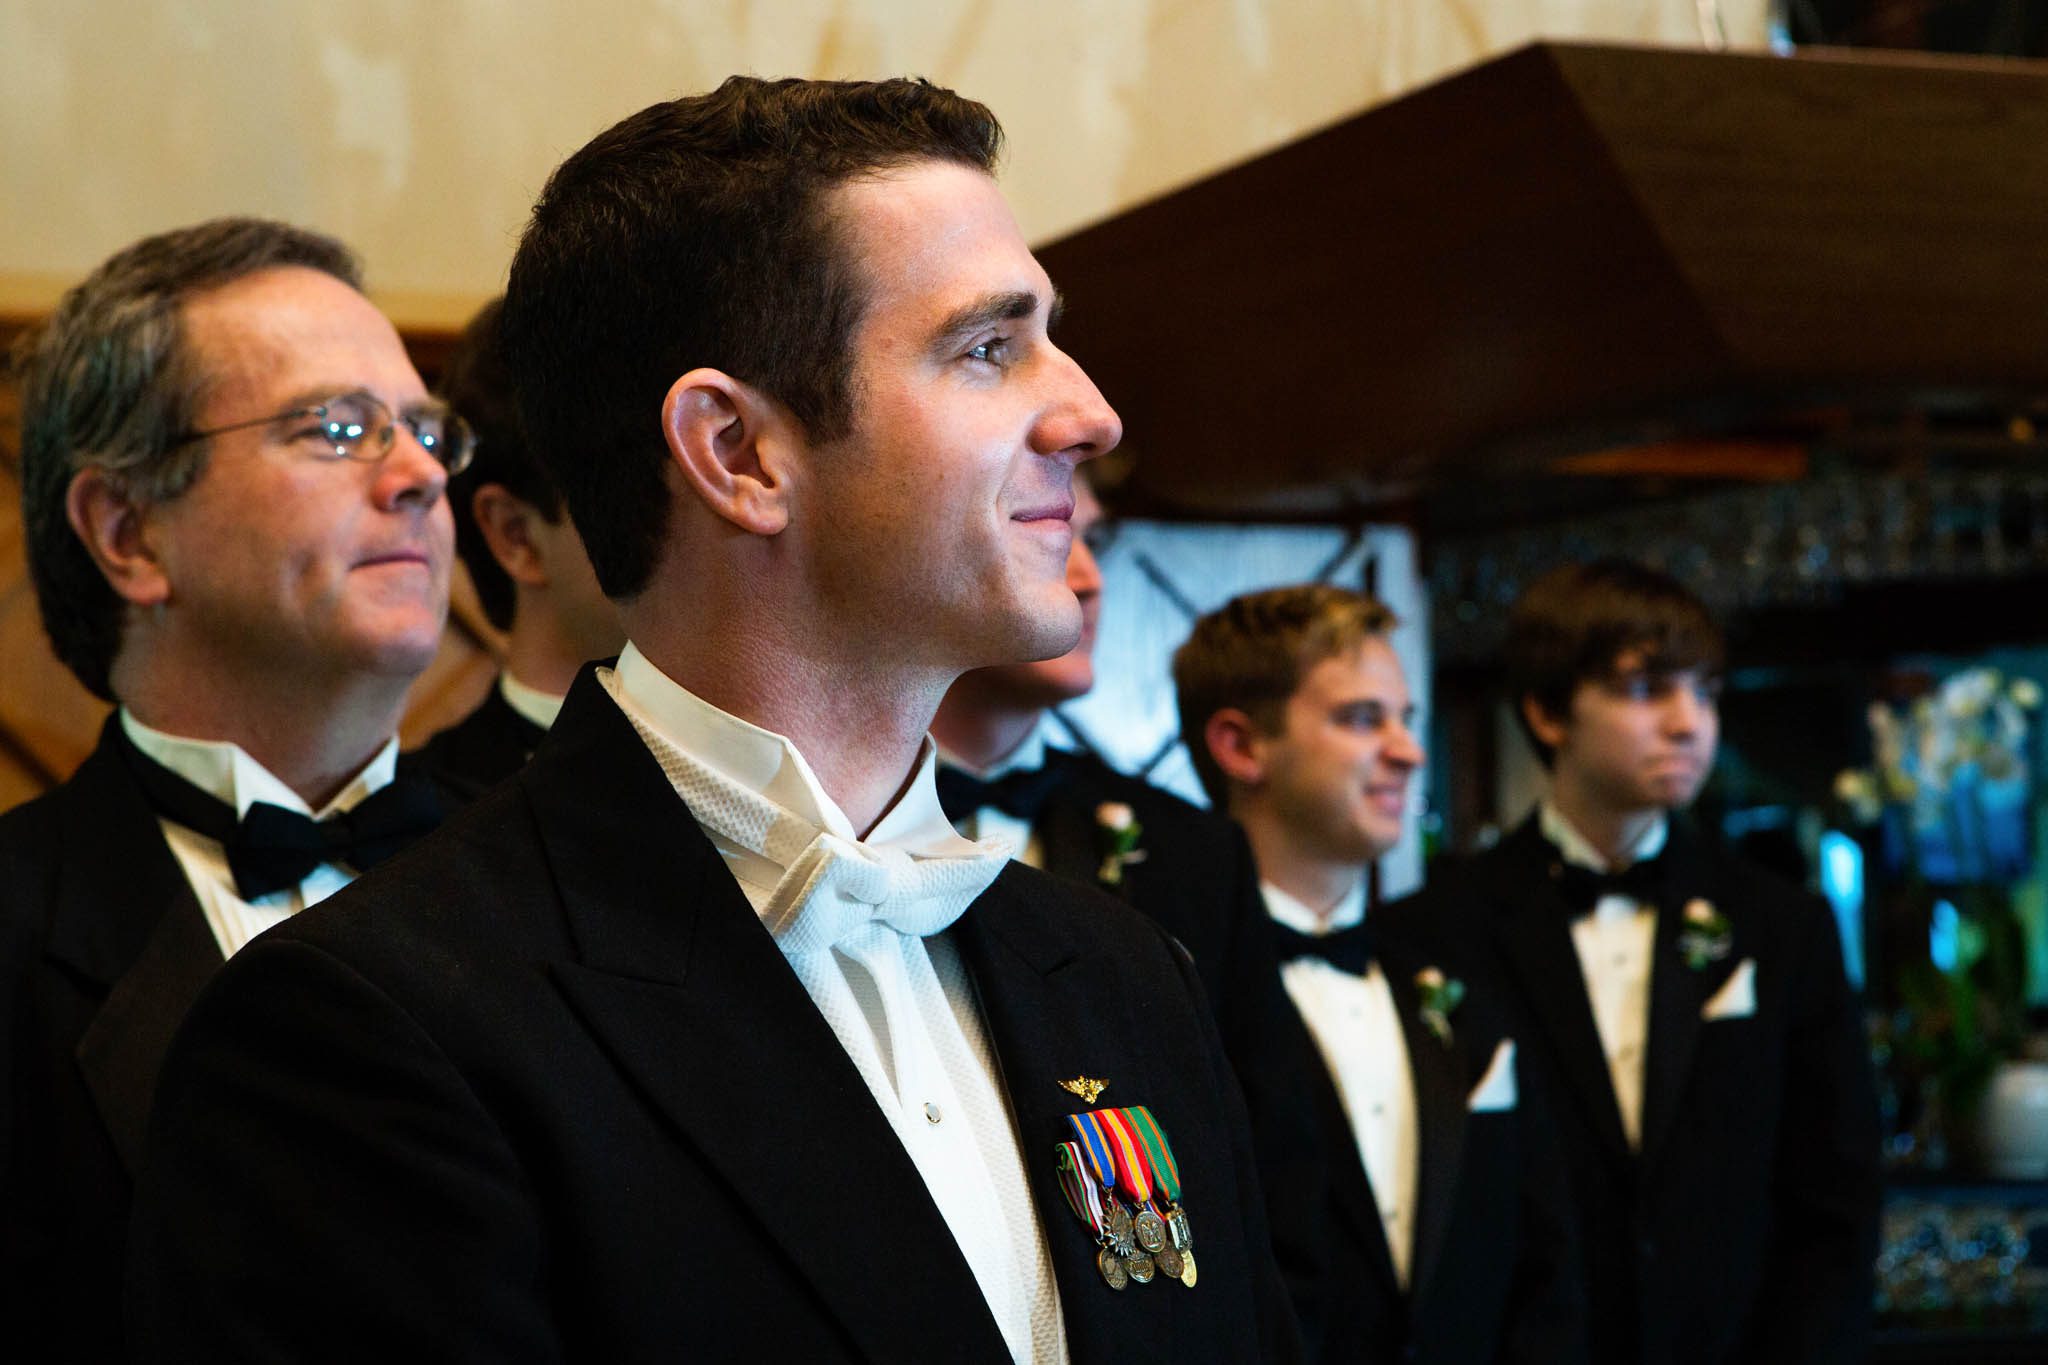 groom waiting for his bride, ceremony, smiling, uniform